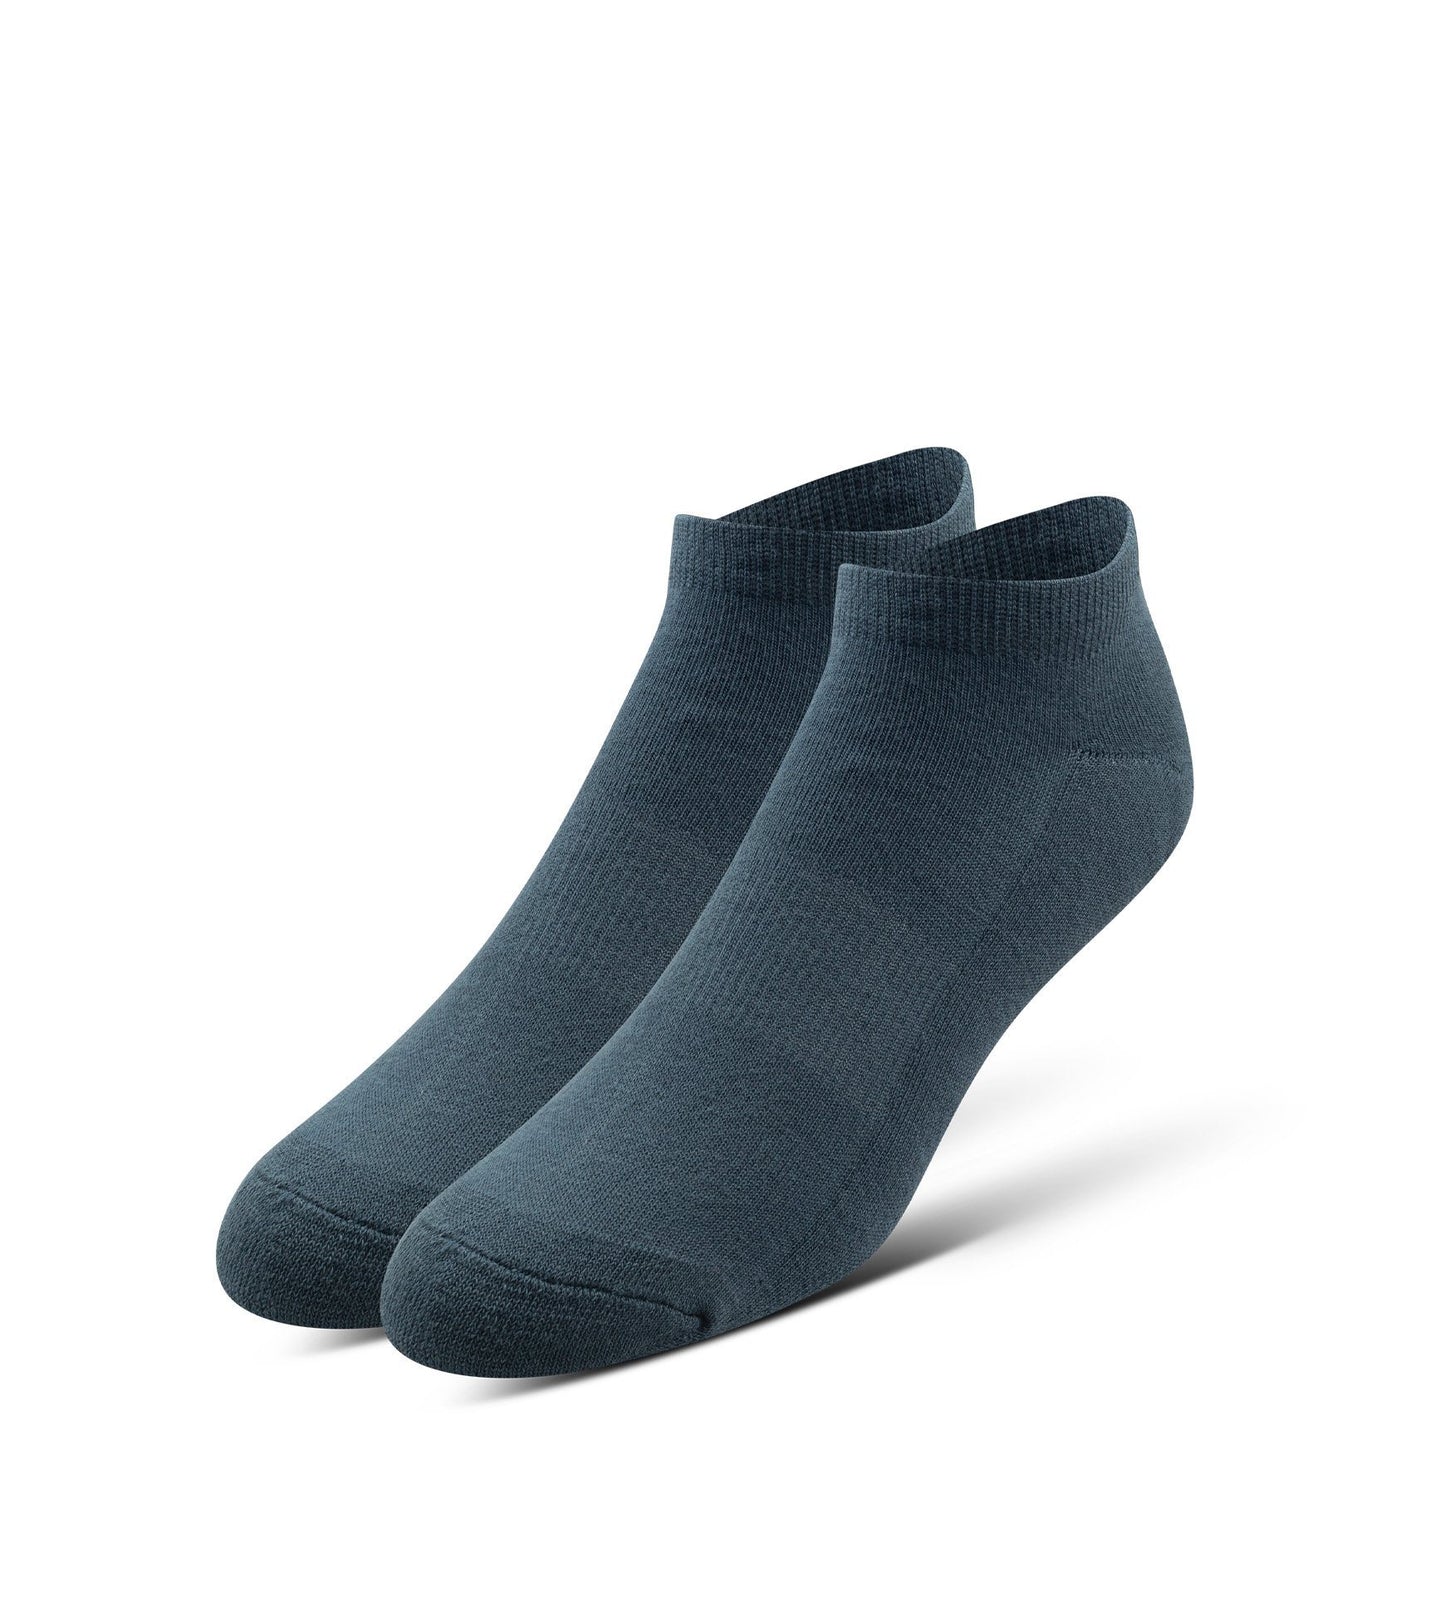 Cushion Low-Cut Socks 3 Pack in solid blue